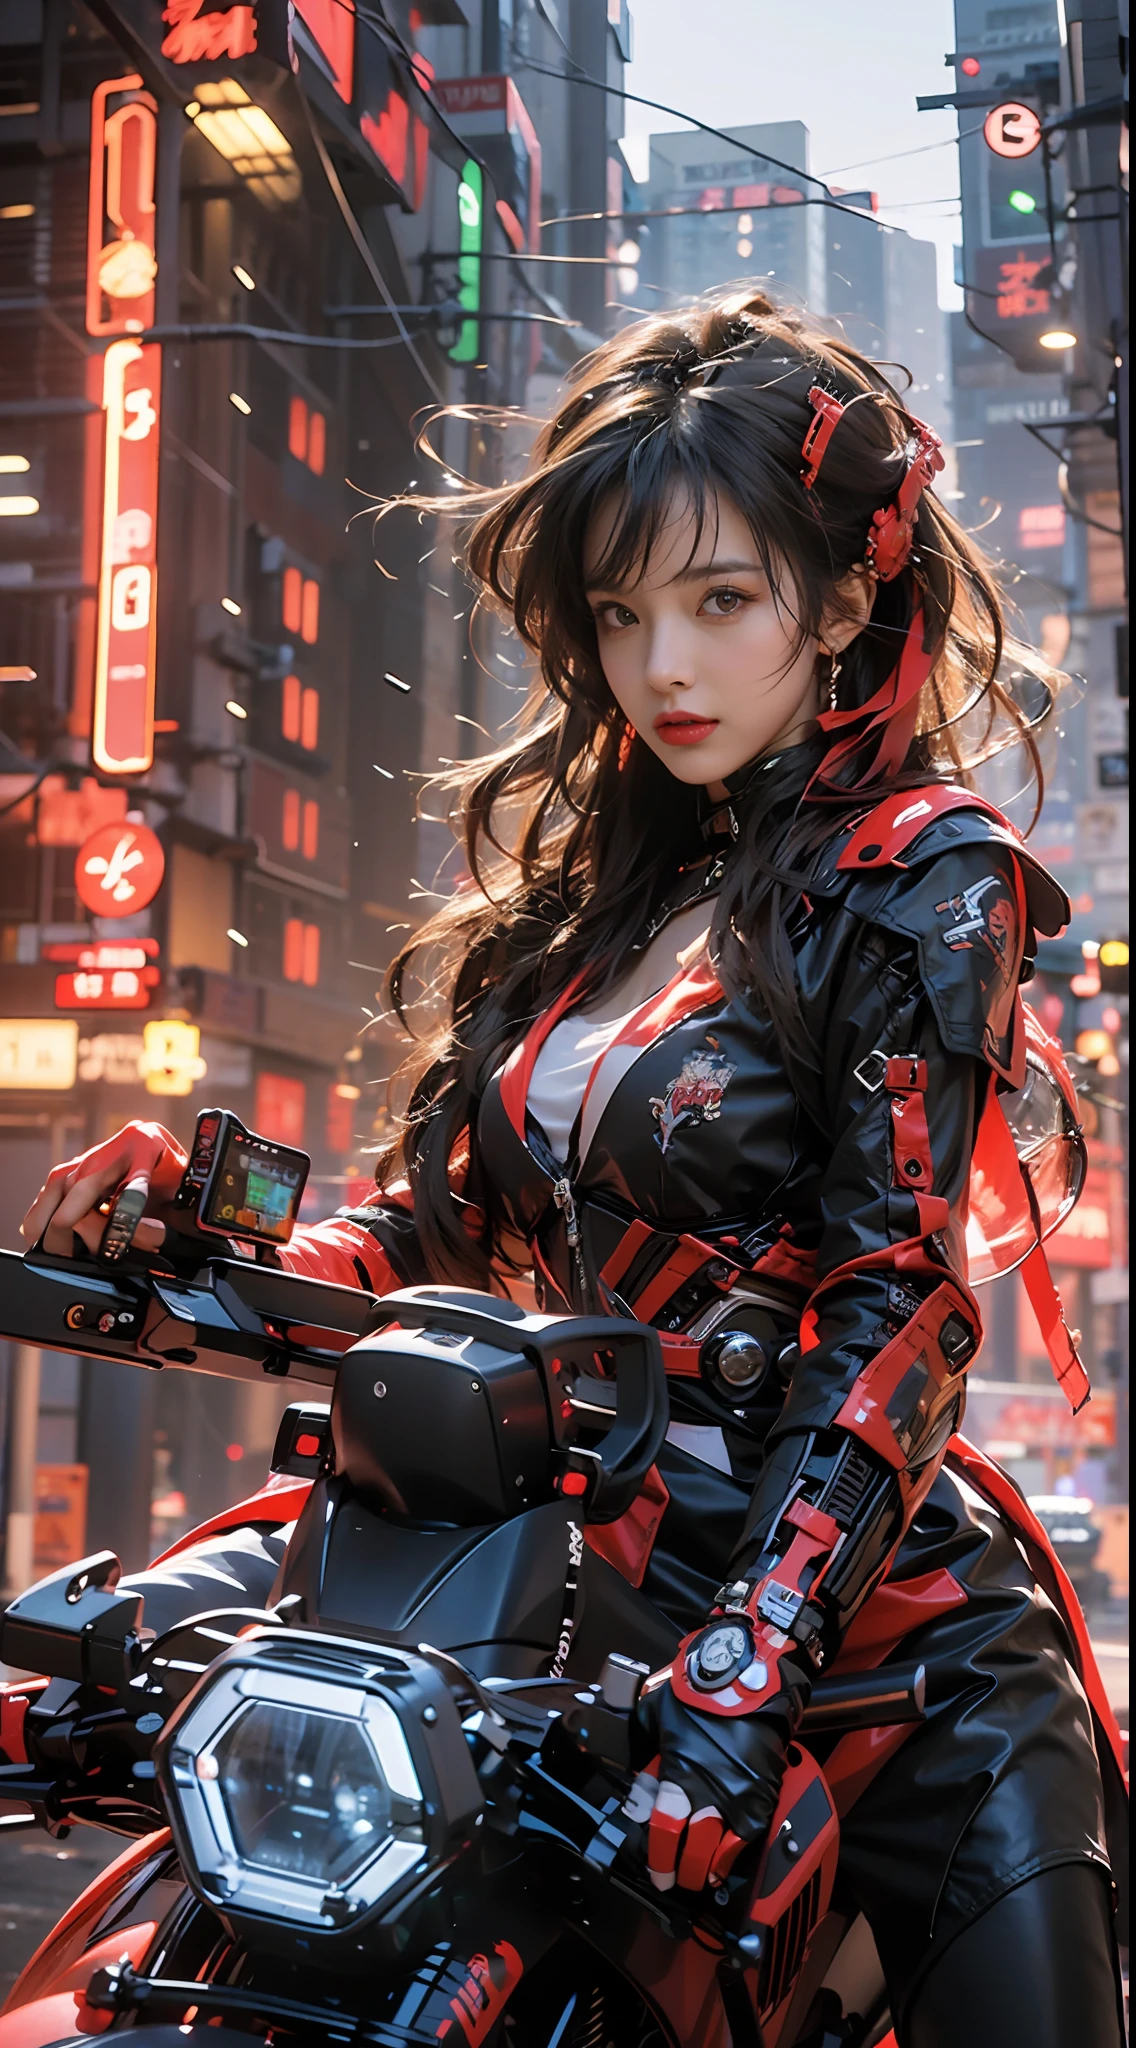 Highest image quality, outstanding detail, ultra-high resolution, (fidelity: 1.4), best illustration, favor details, highly condensed 1girl, with a delicate and beautiful face, dressed in black and red mecha, wearing a mecha helmet, holding a direction controller, riding on a motorcycle, the background is a high-tech lighting scene of the future city.